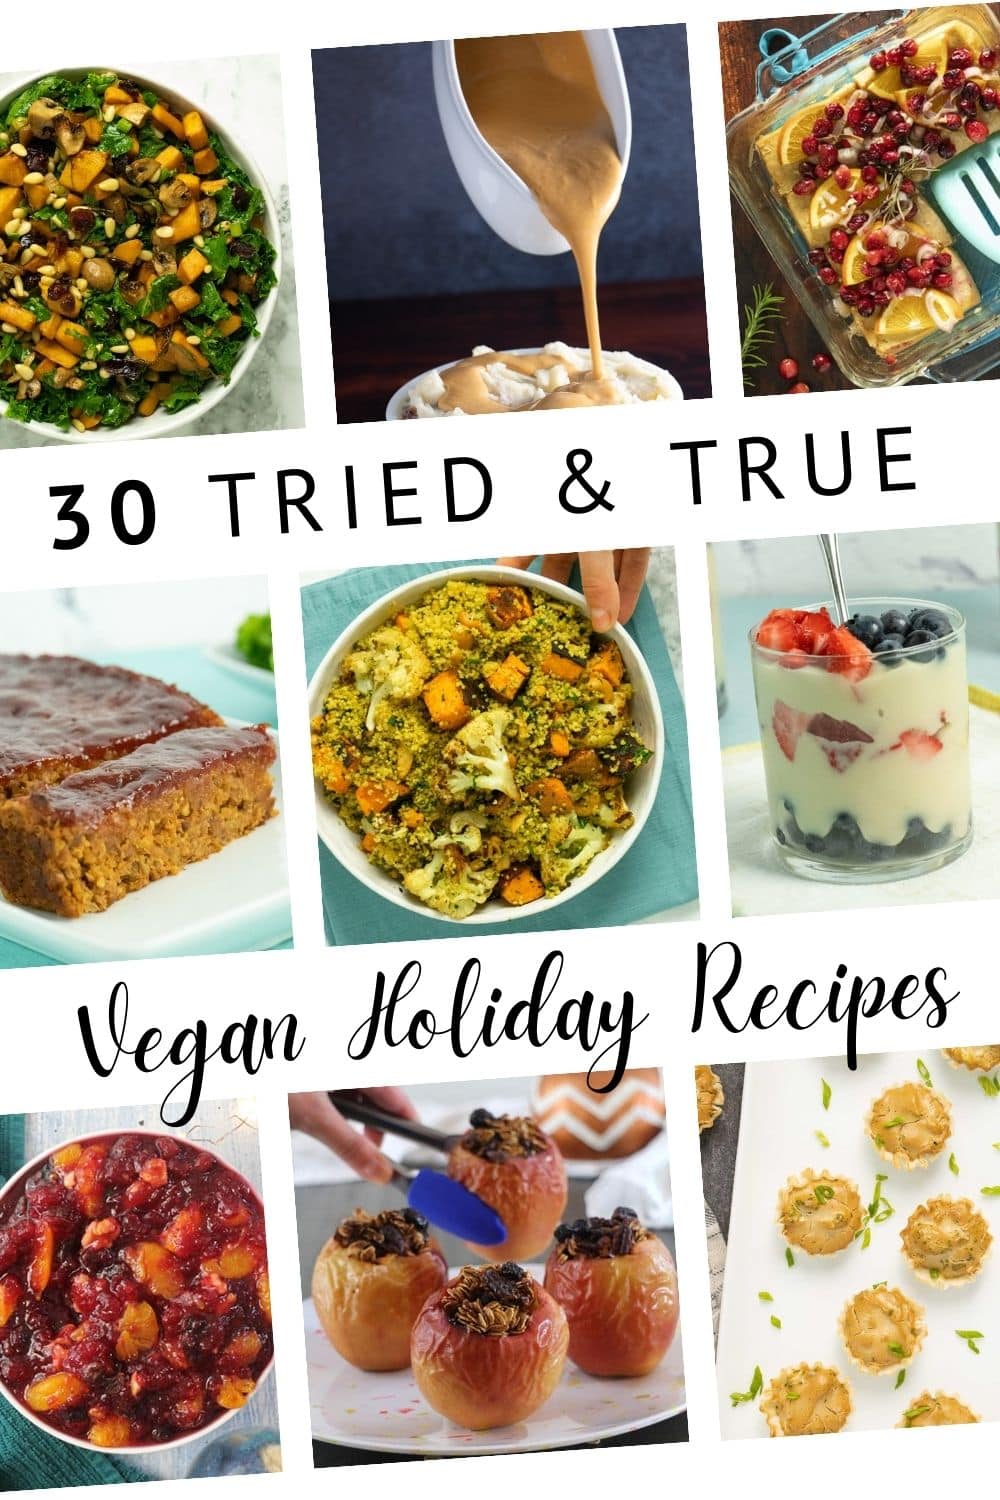 image collage of vegan holiday recipes with a text overlay